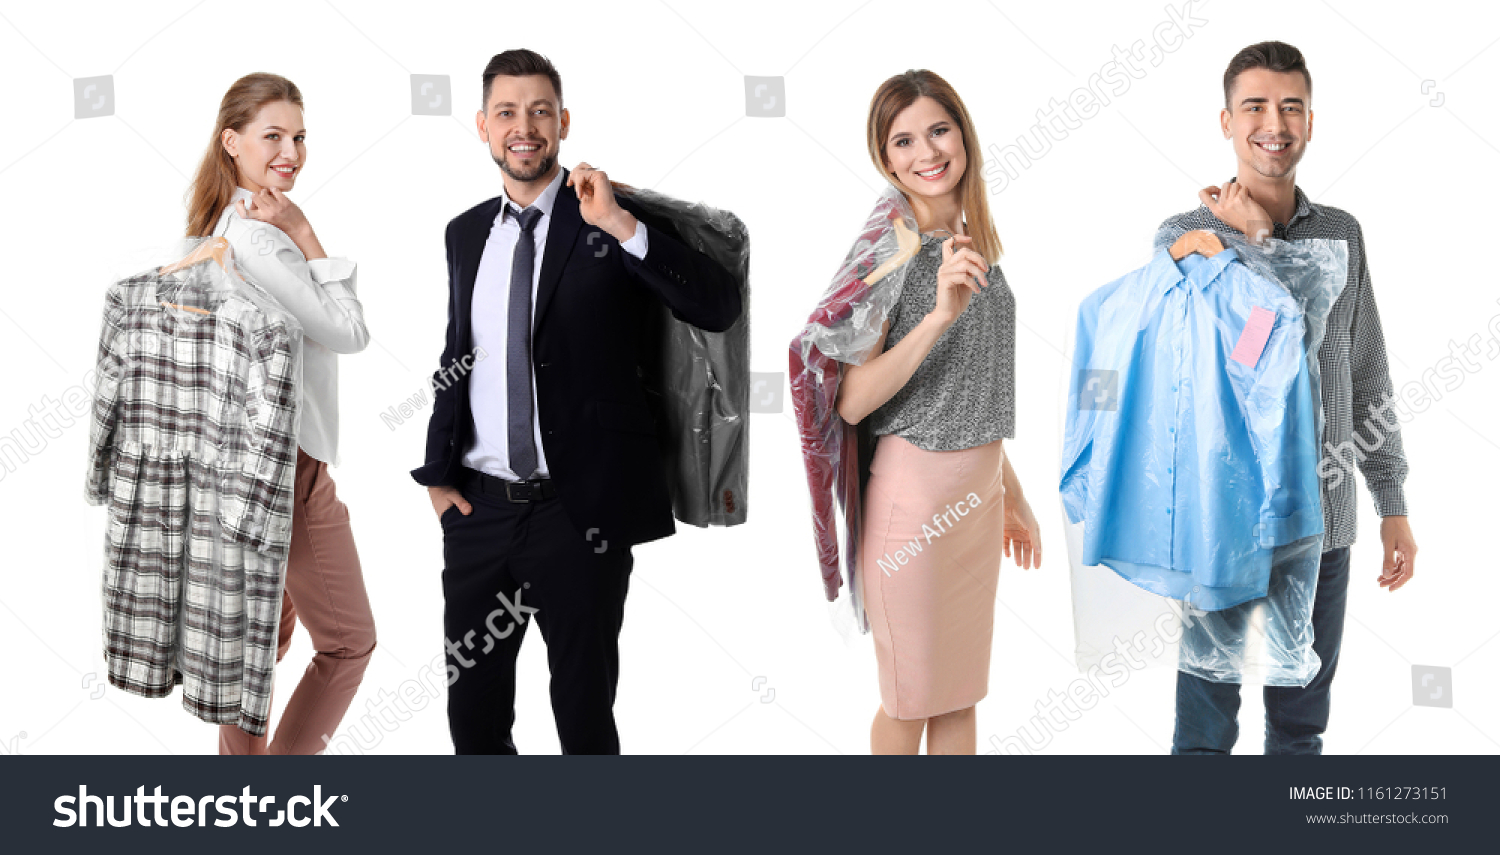 Set with people and clothes in plastic bags on white background. Dry-cleaning service #1161273151